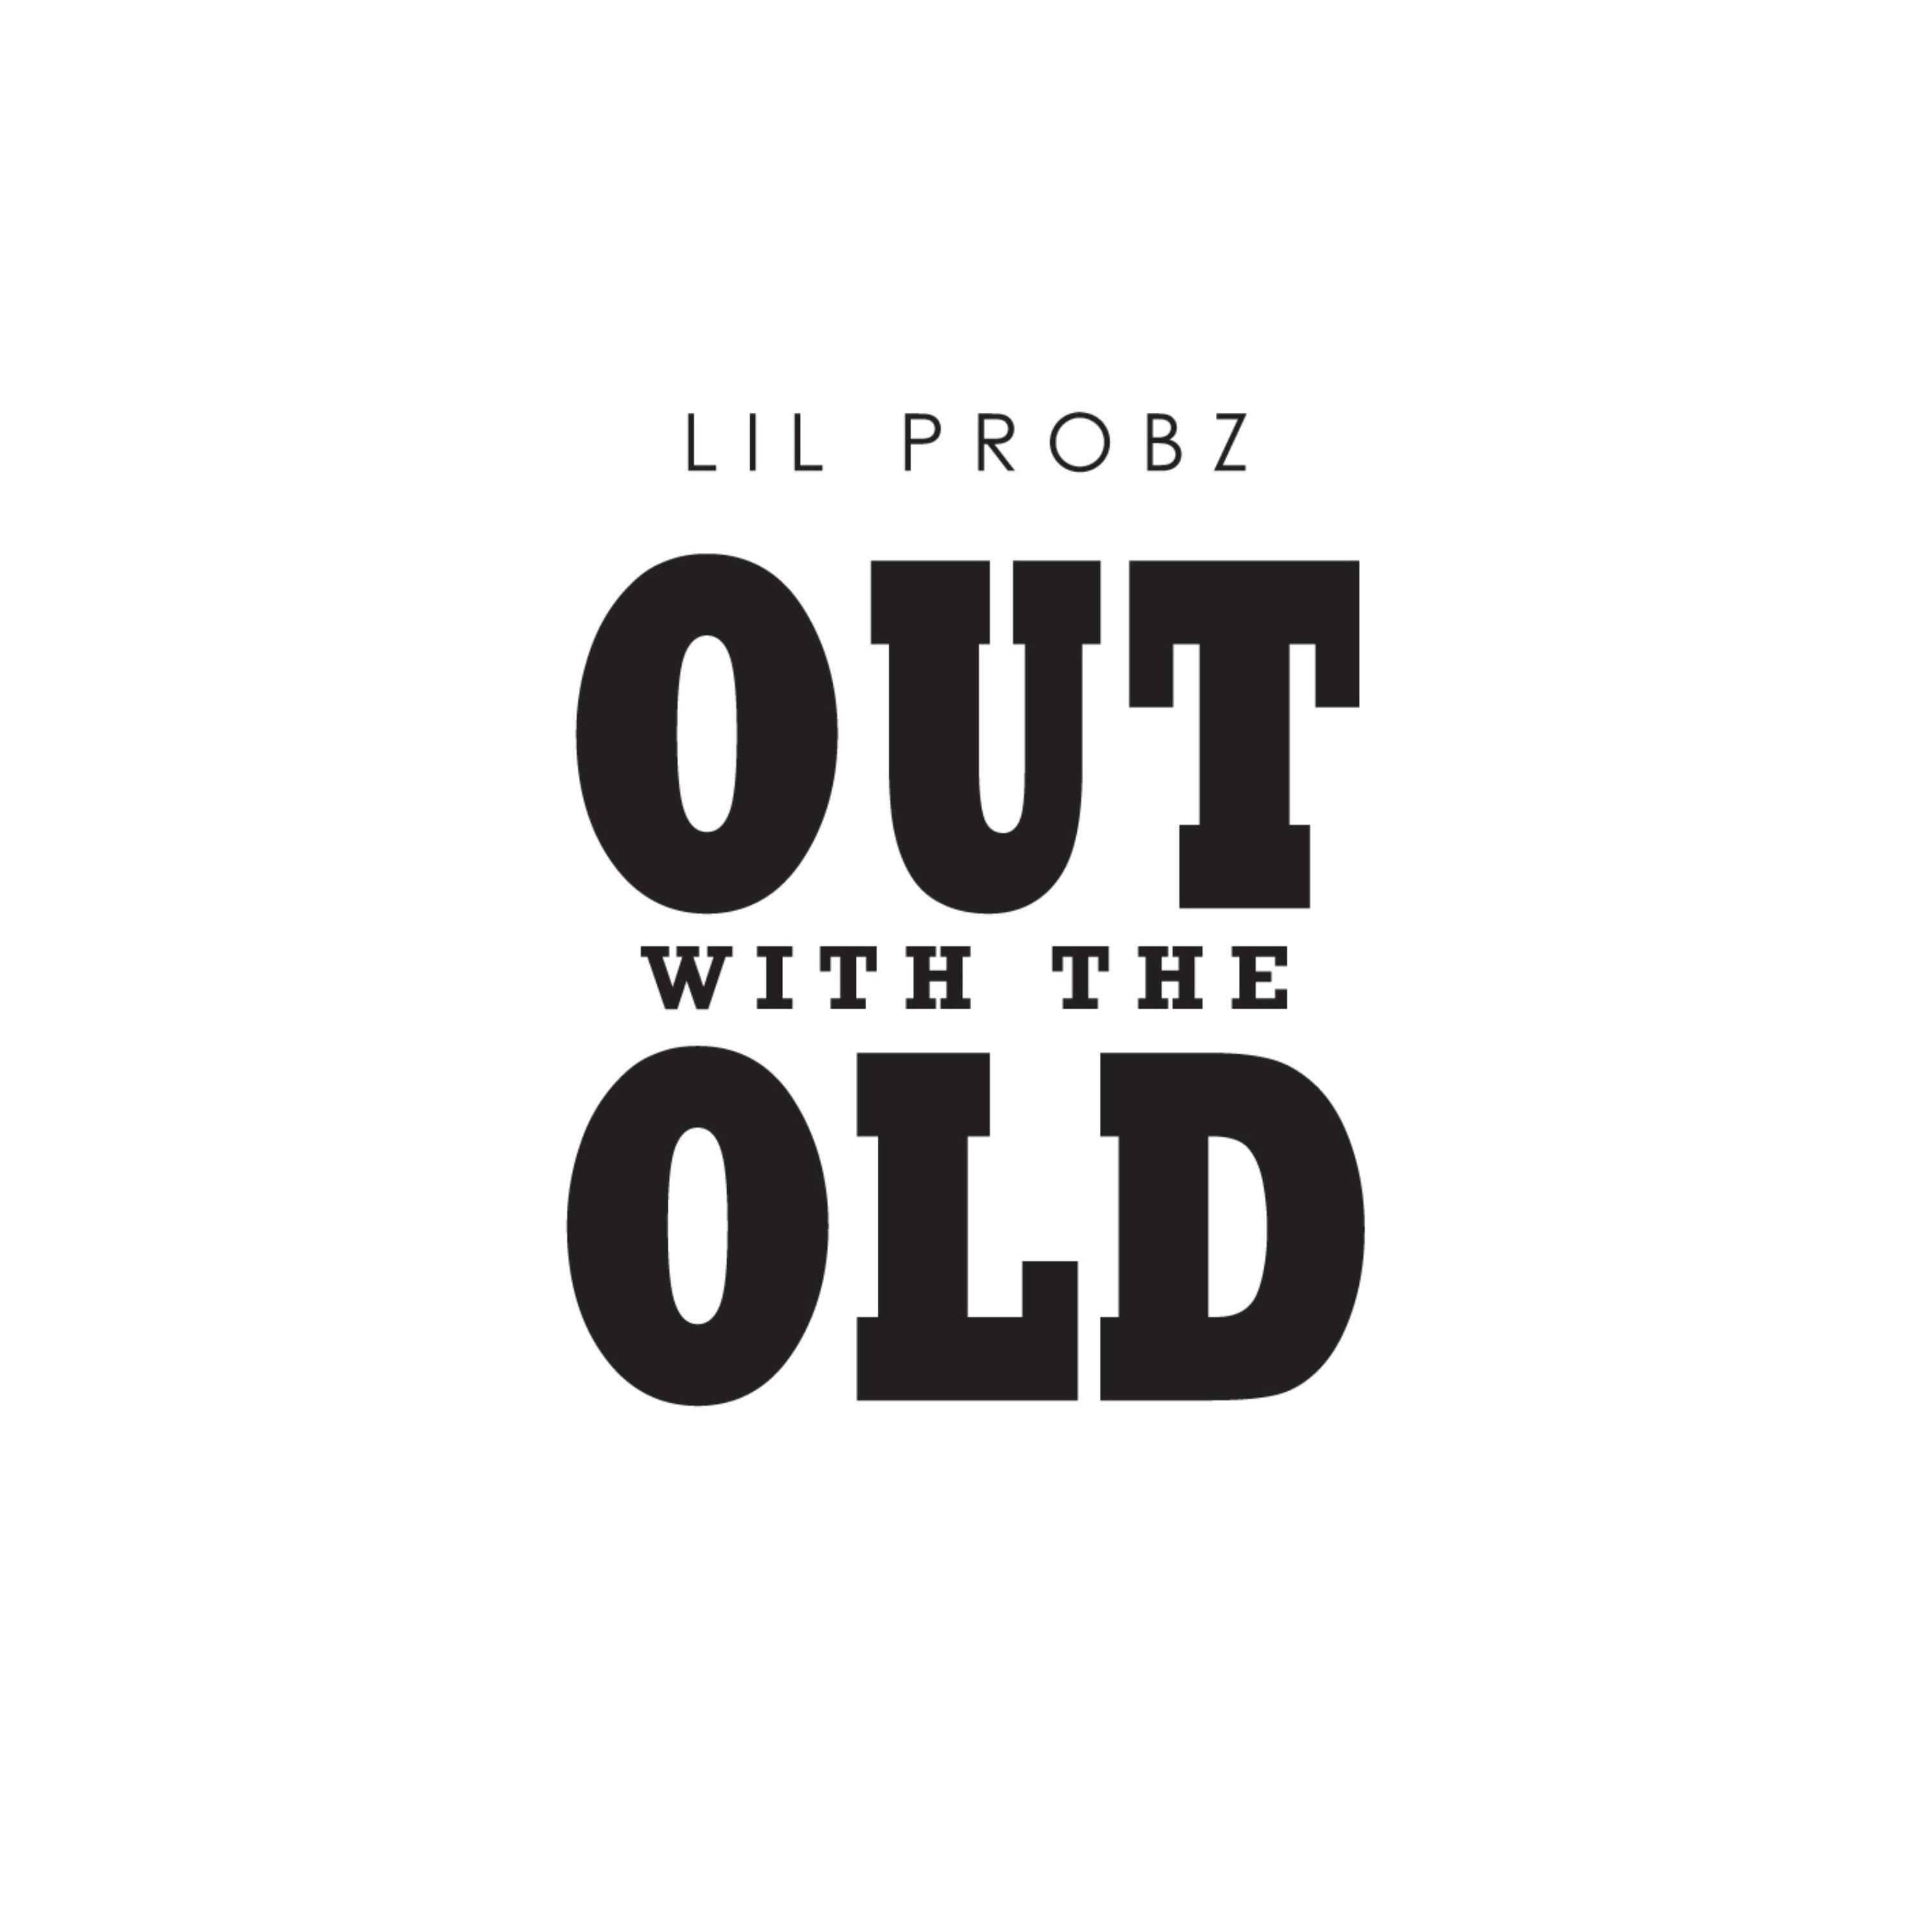 Lil Probz - Grinding